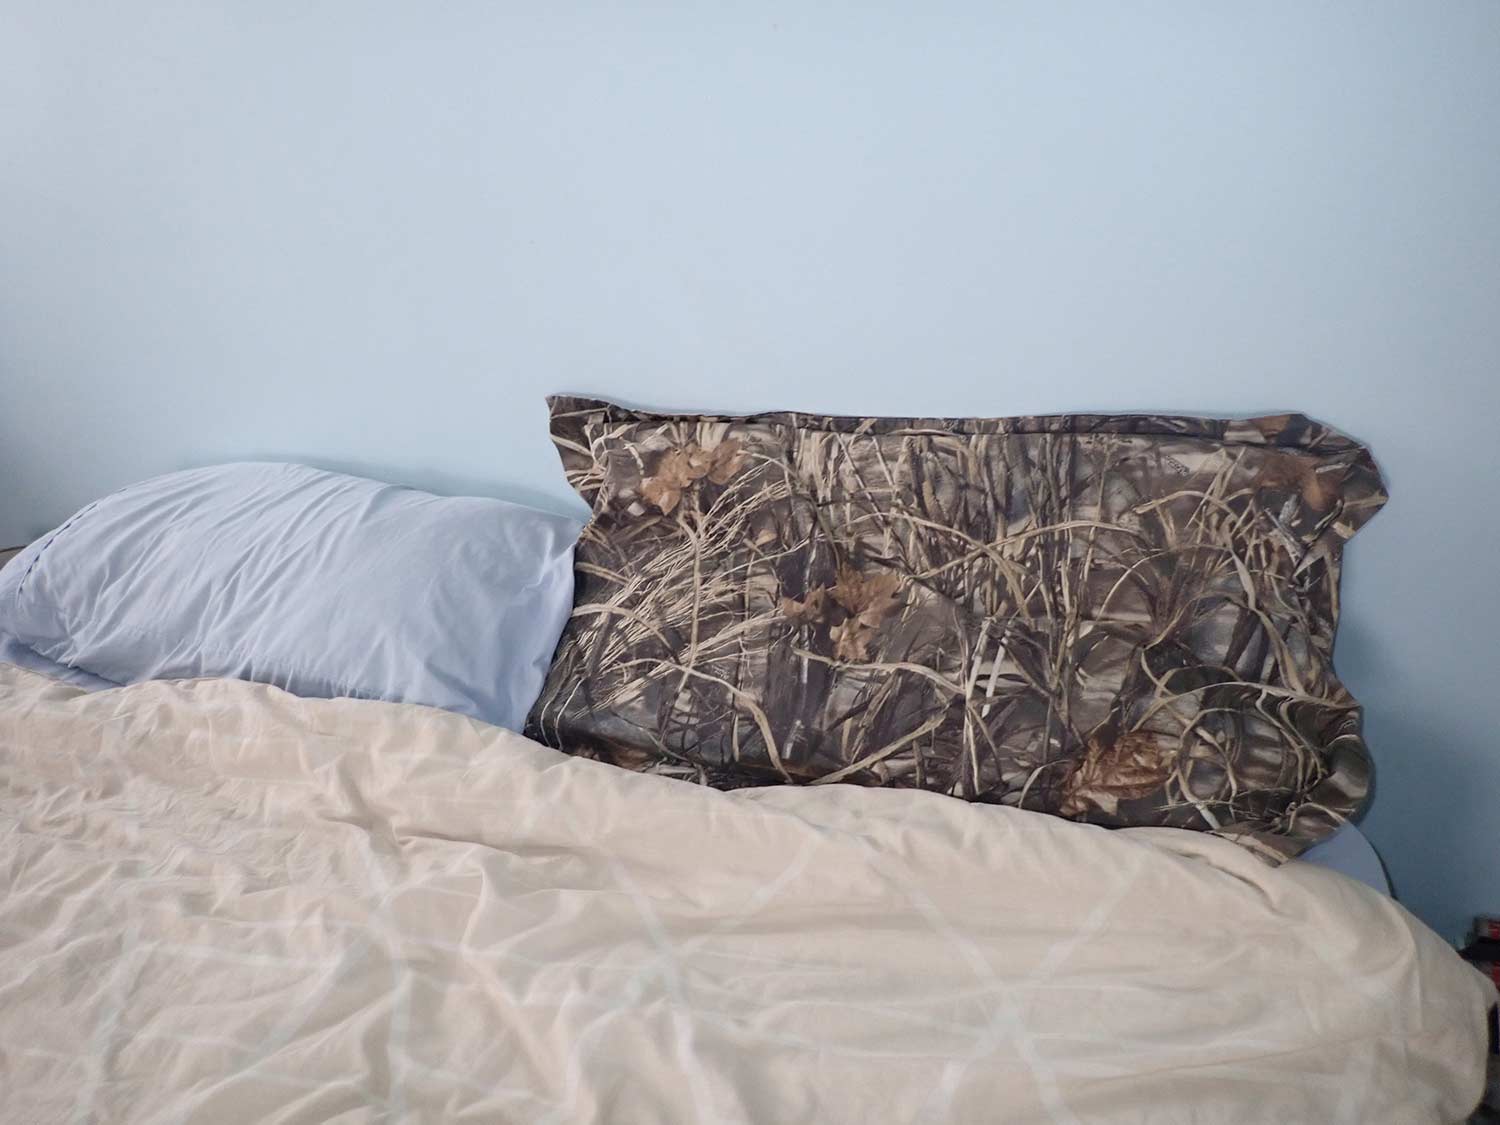 A camoflauge pillow case stuffed with waterfowl down.